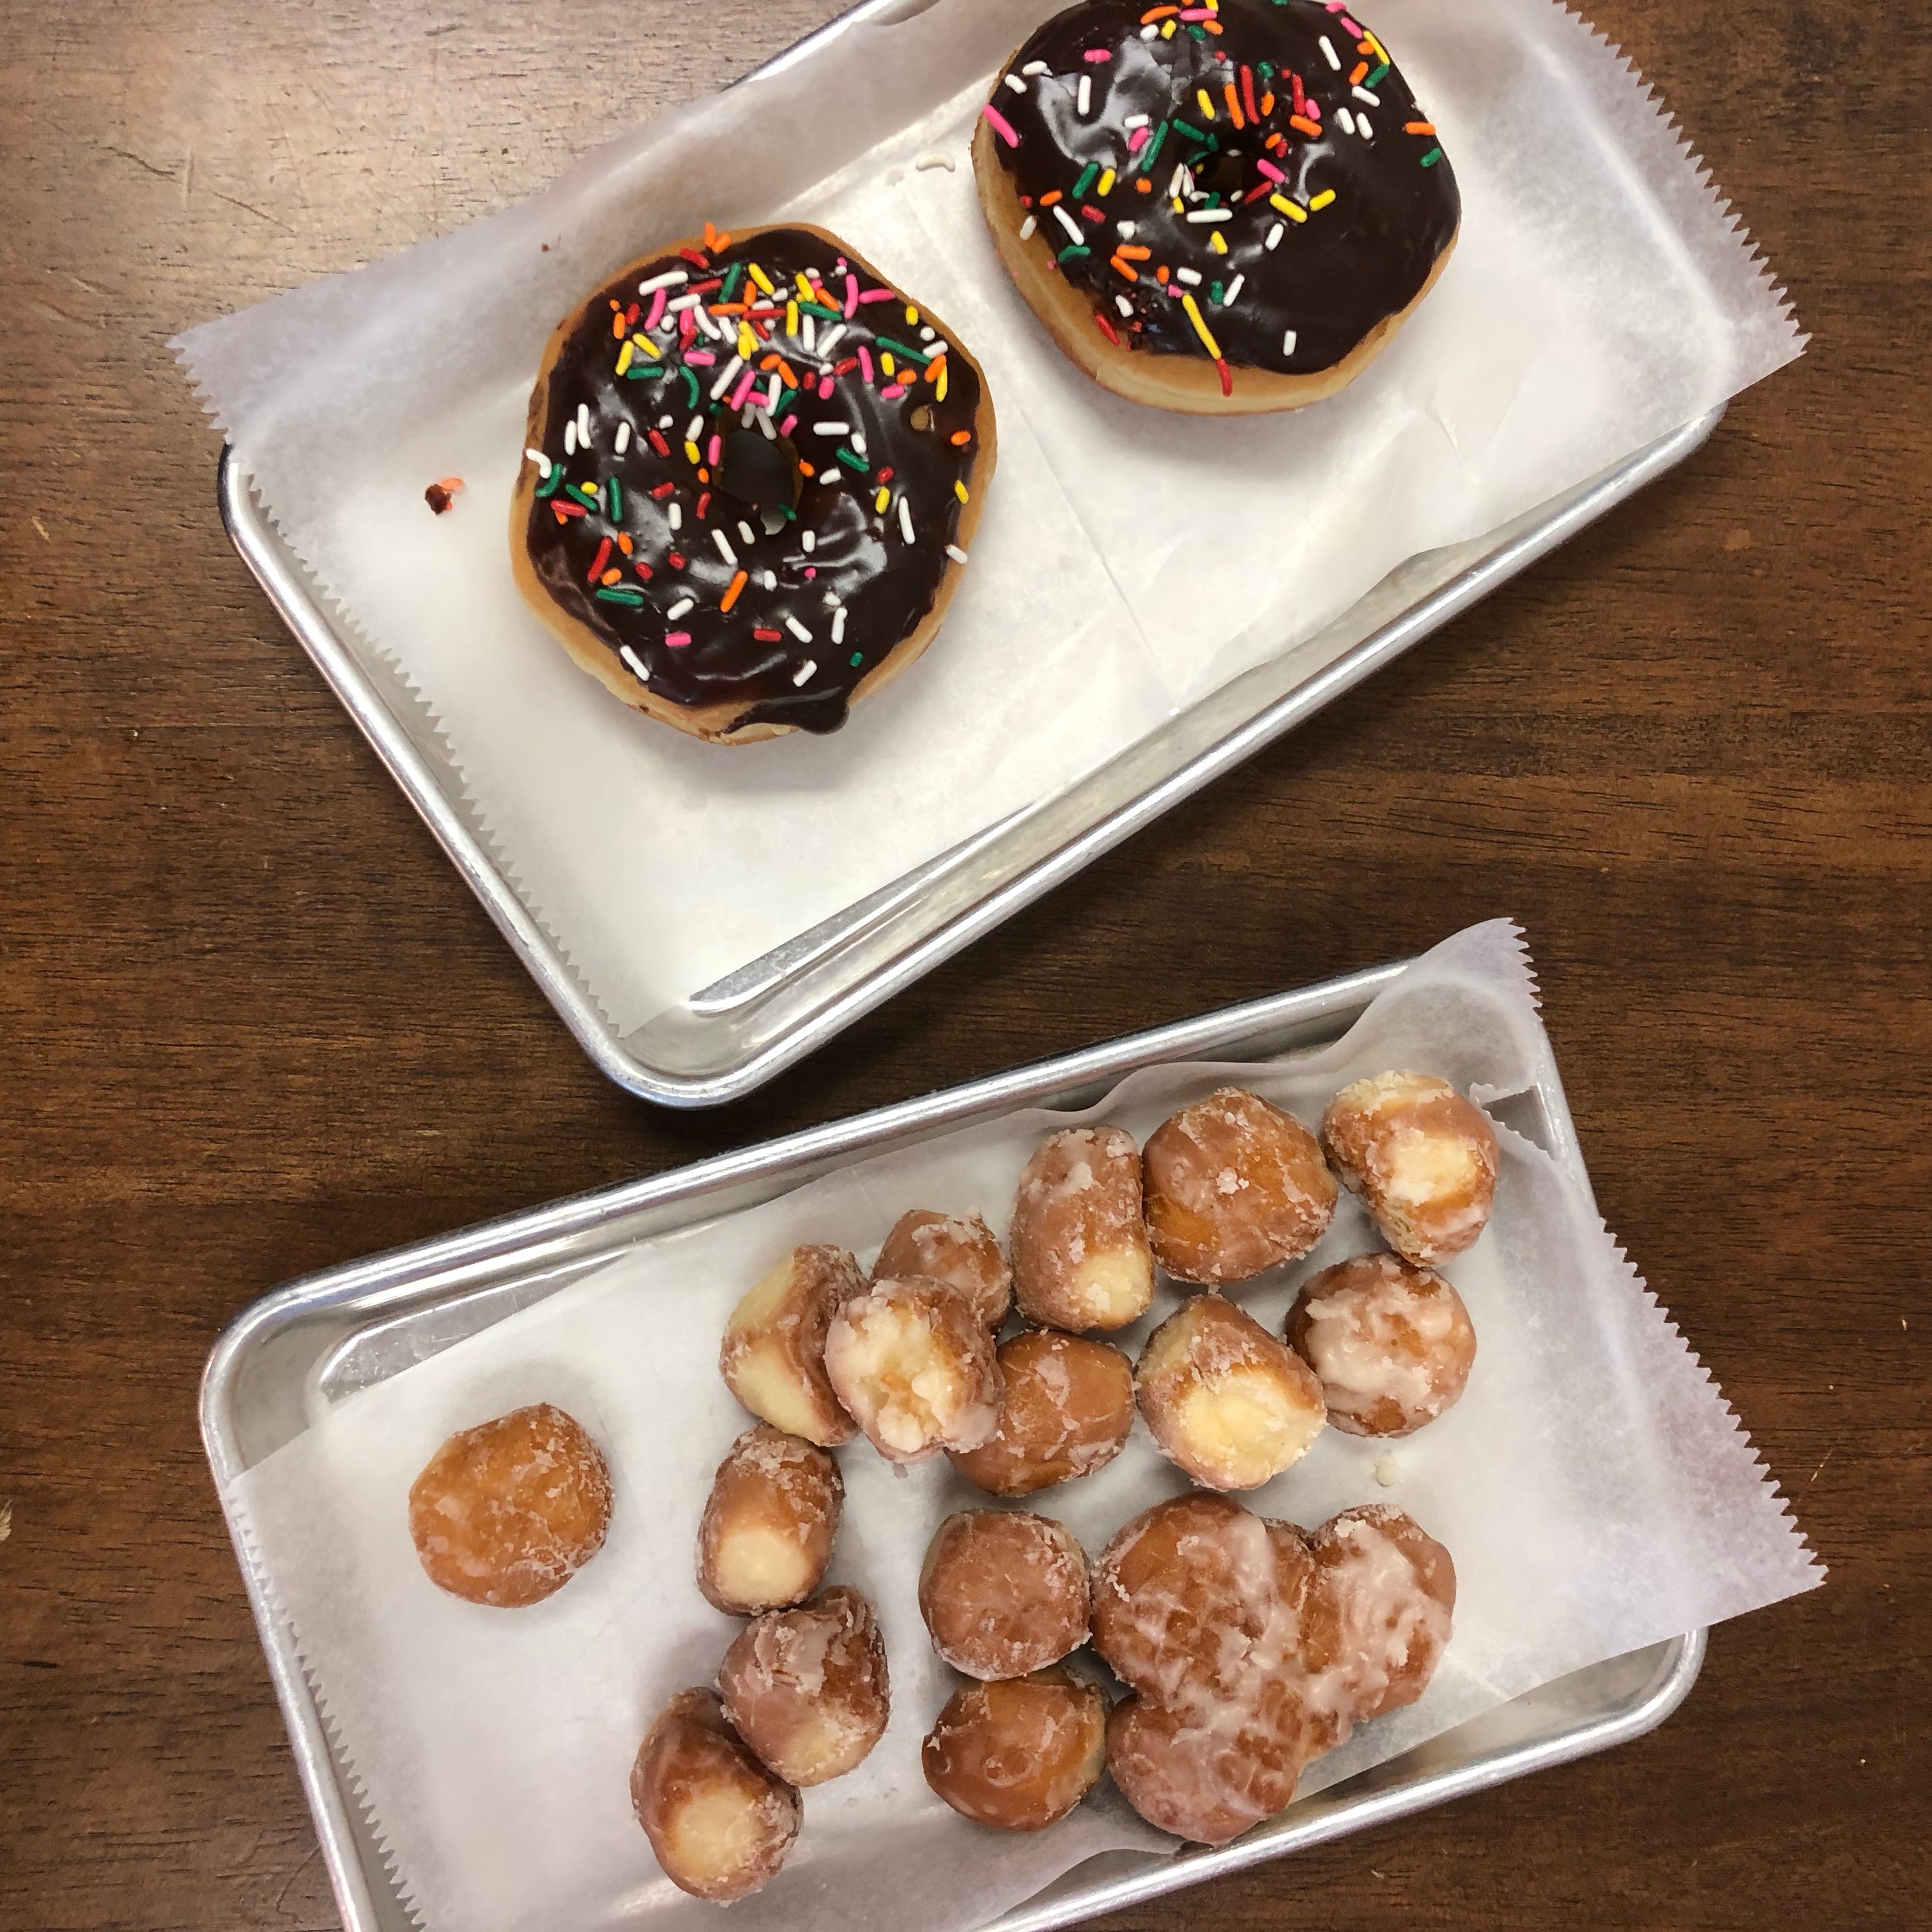 BEST PLACES IN 2022 TO GET DONUTS IN BATON ROUGE